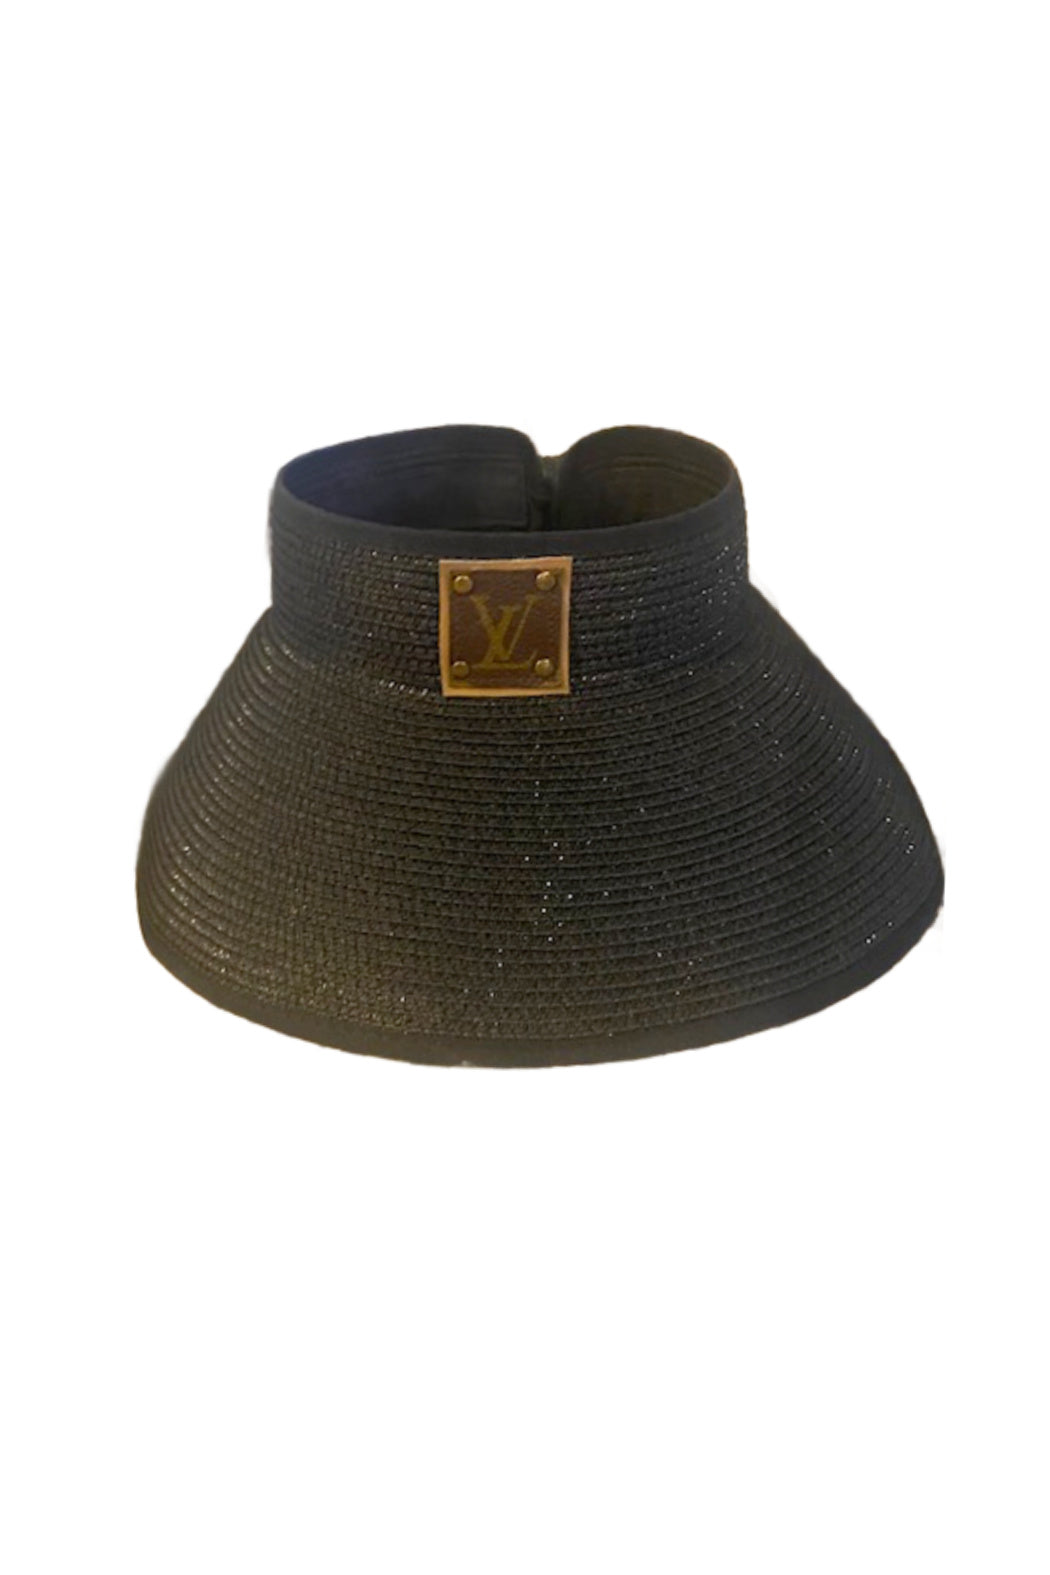 Up-cycled LV Rollable Packable Straw Visor